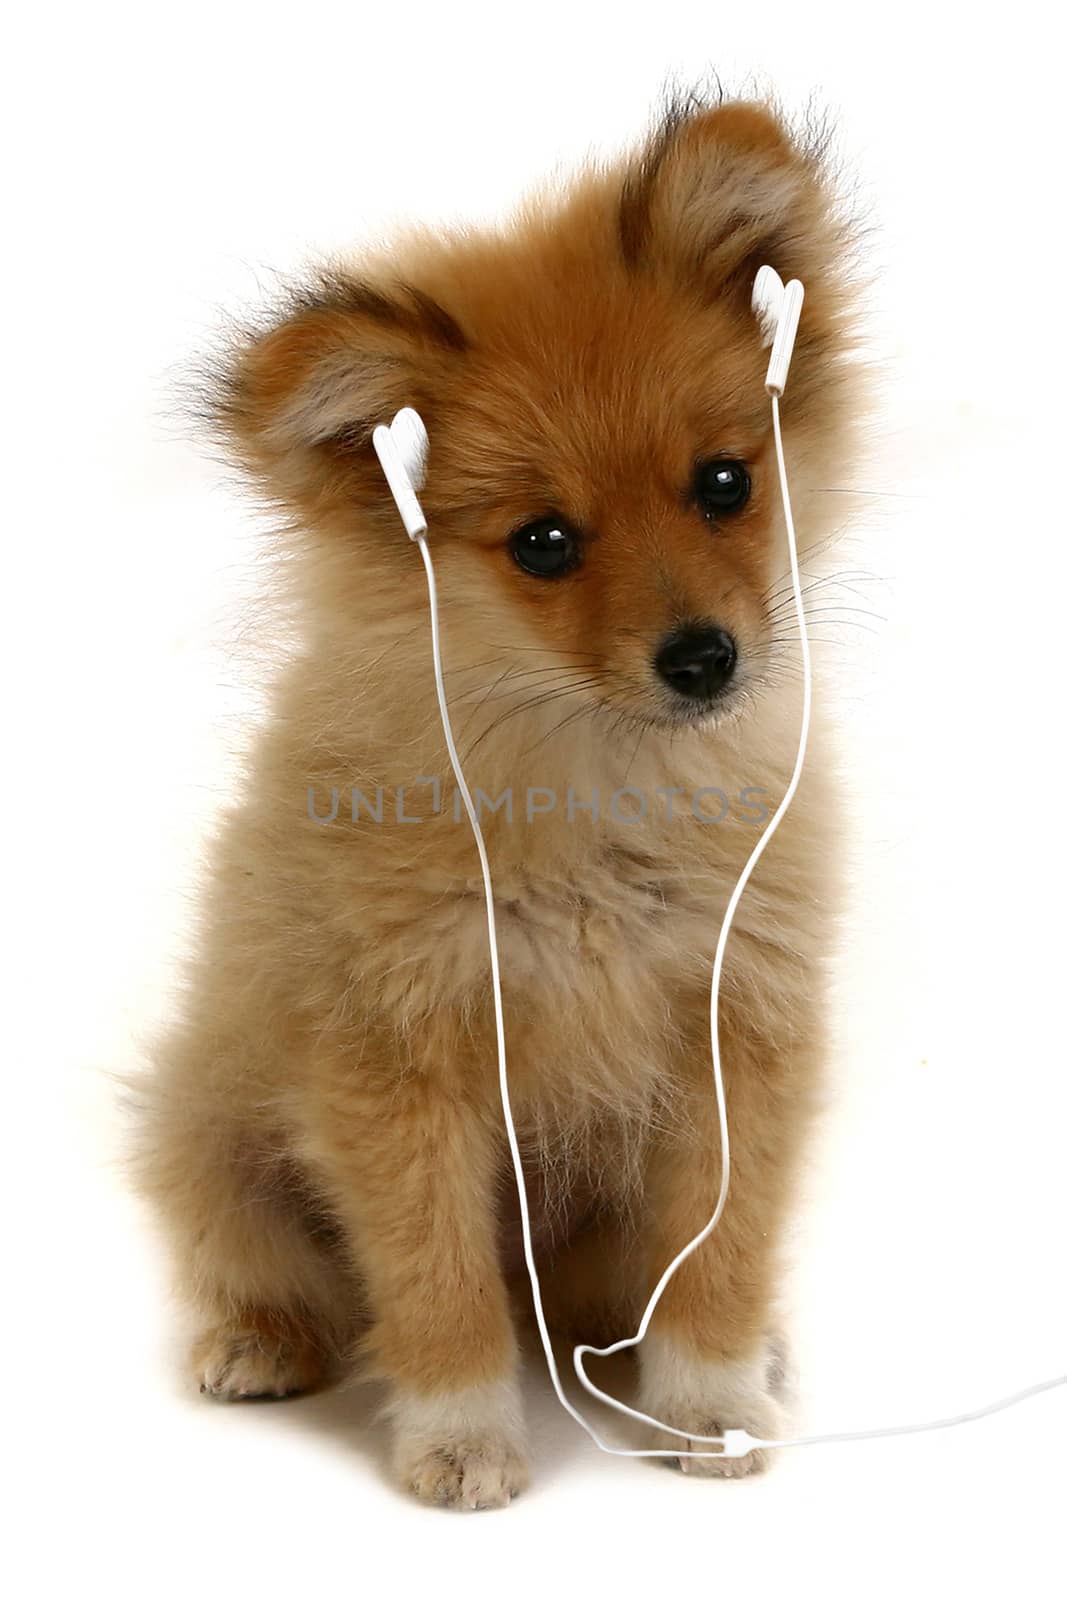 Puppy With MP3 Headphones by tobkatrina